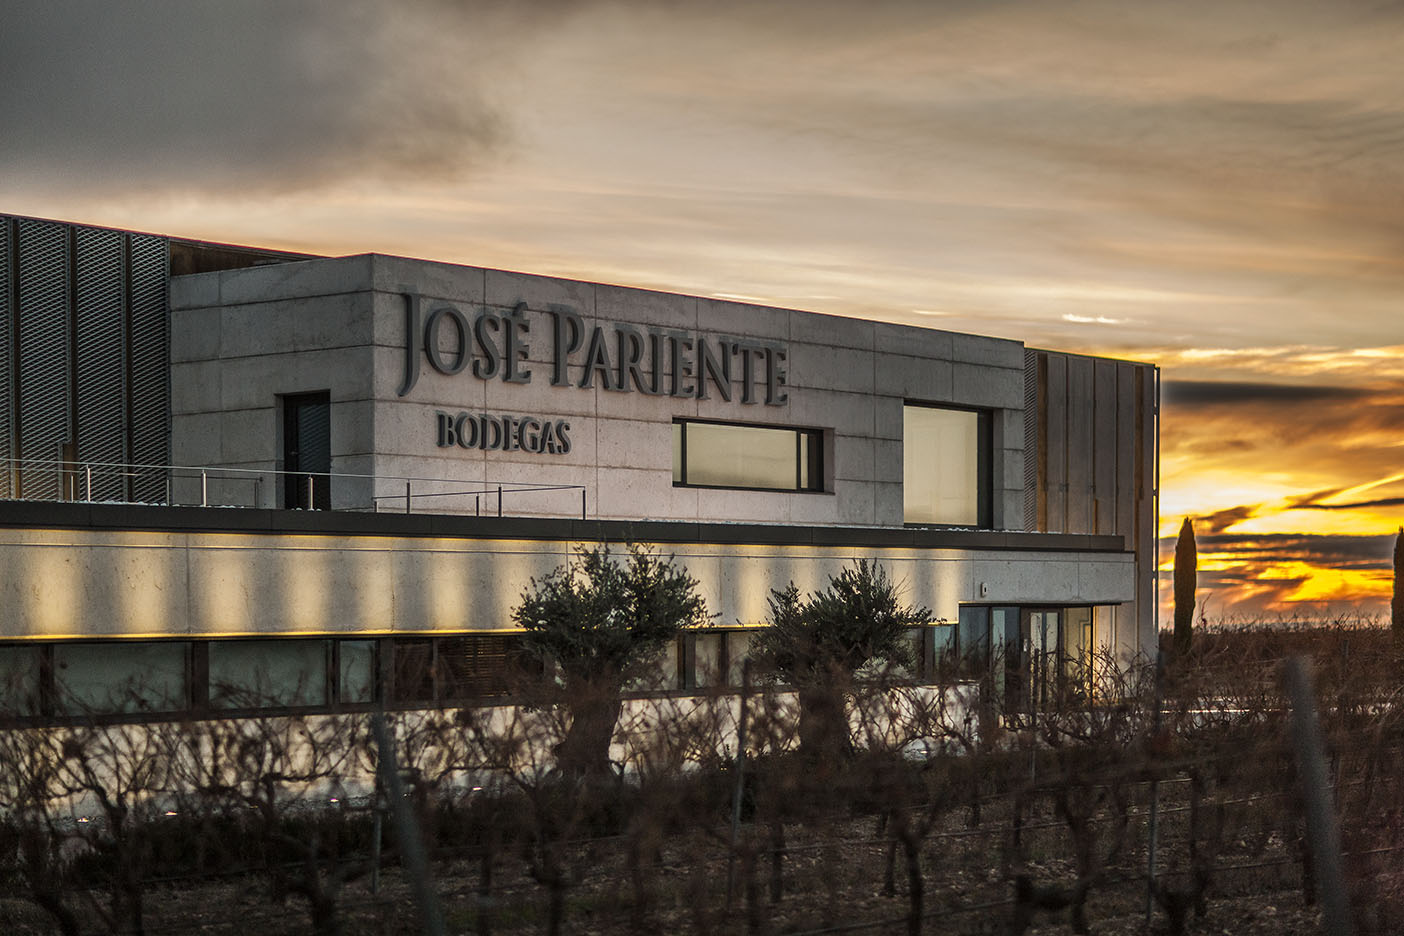 You are currently viewing Bodegas José Pariente